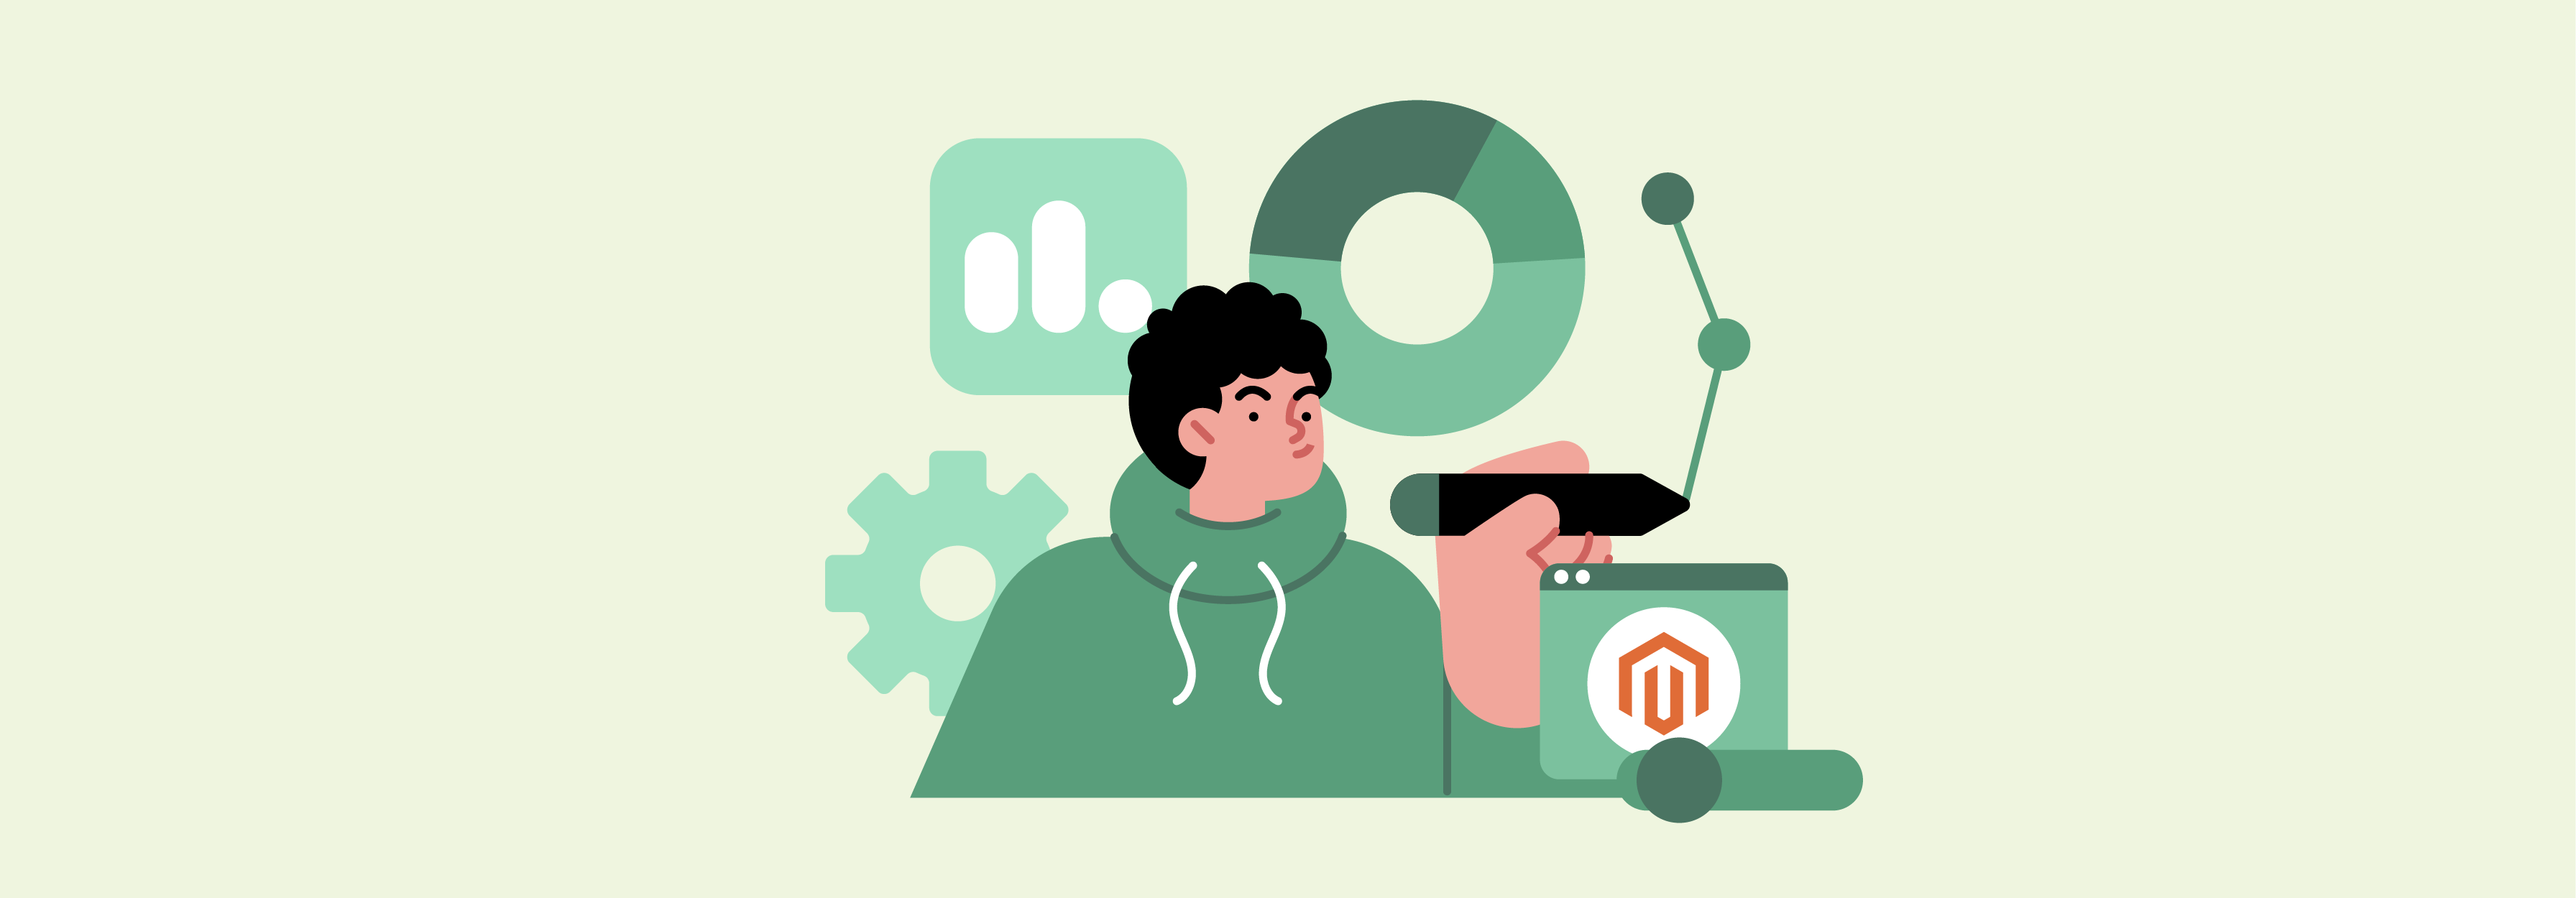 Enhancing Magento website performance for email marketing traffic